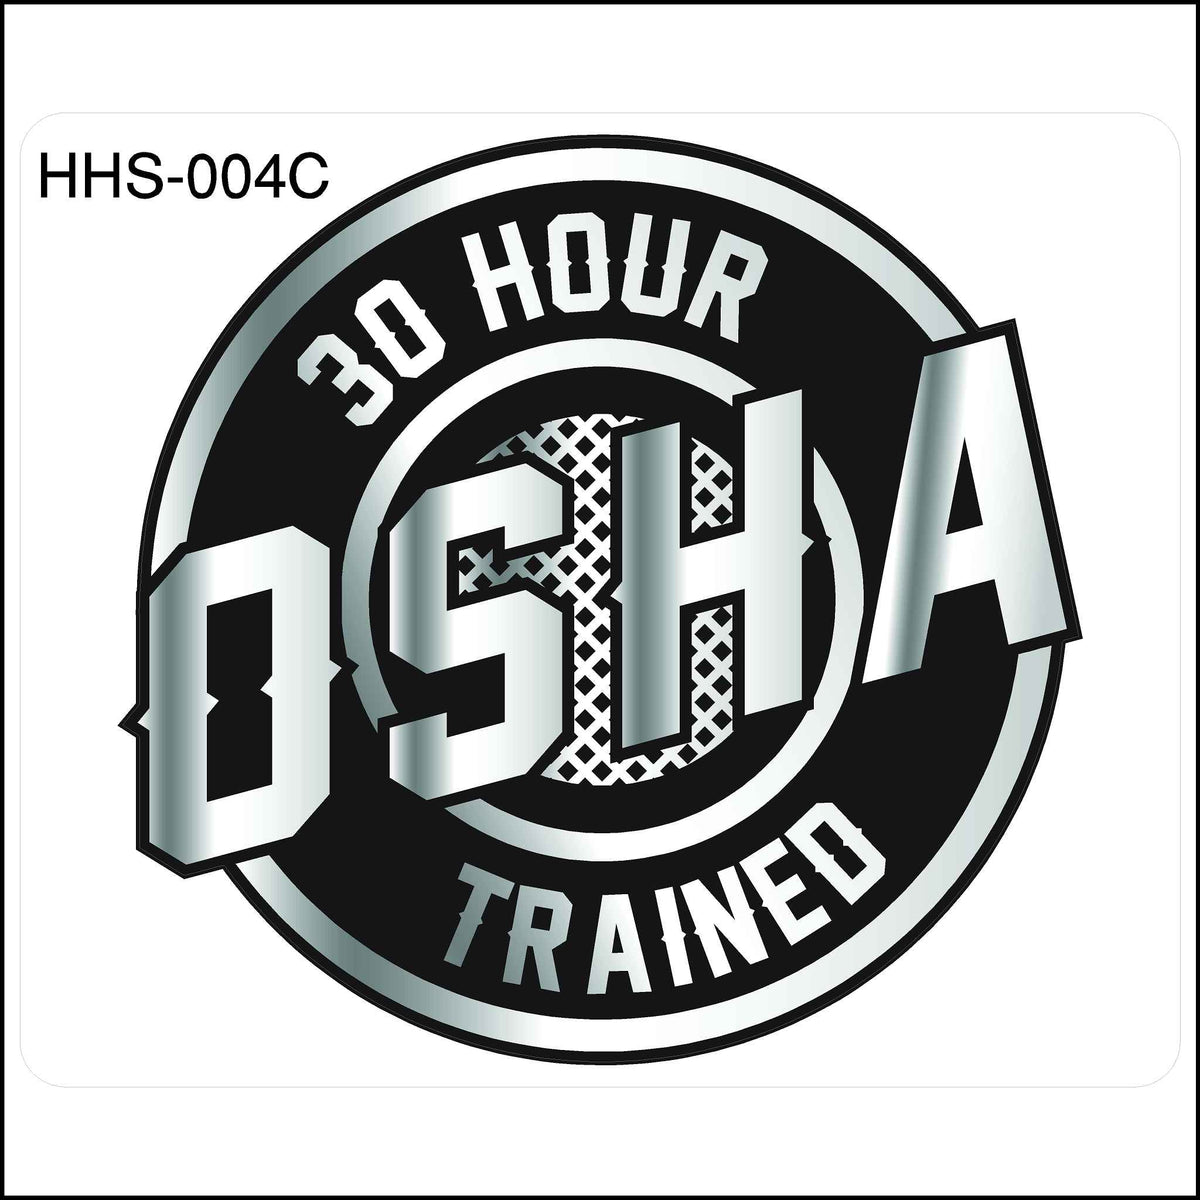 osha 30 hour trained hard hat sticker printed with shiny silver on black background